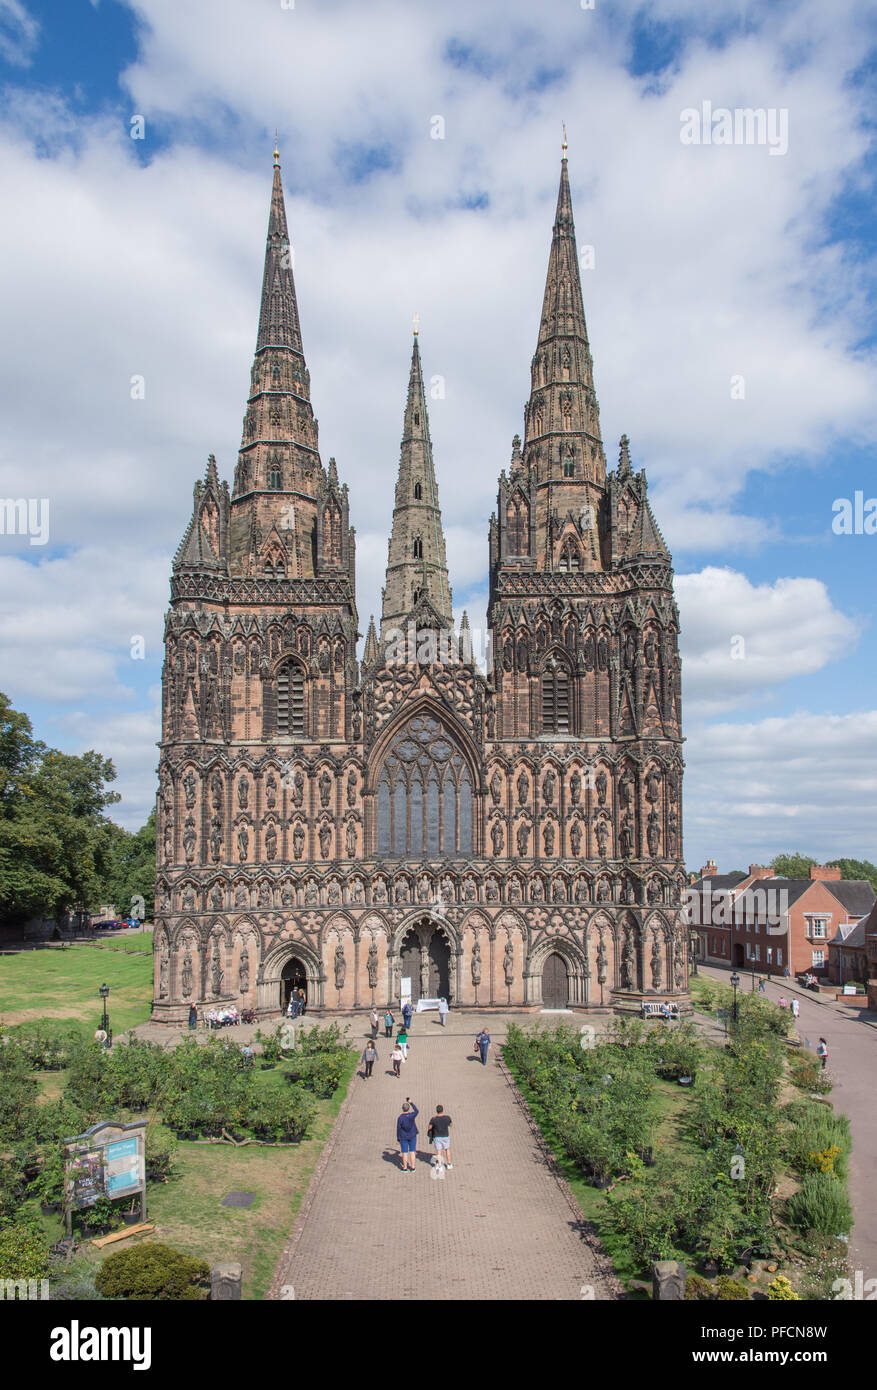 Lichfield Cathedral Staffordshire England with 1918 trees forming a Peace Woodland as part of a Great Exhibition, Imagine Peace, to celebrate the centenary of 1918 created by artist in residence Peter Walker from 17th August 2018 to 27th August 2018.  After the Exhibition the trees will be planted in Beacon Park Lichfield. Stock Photo